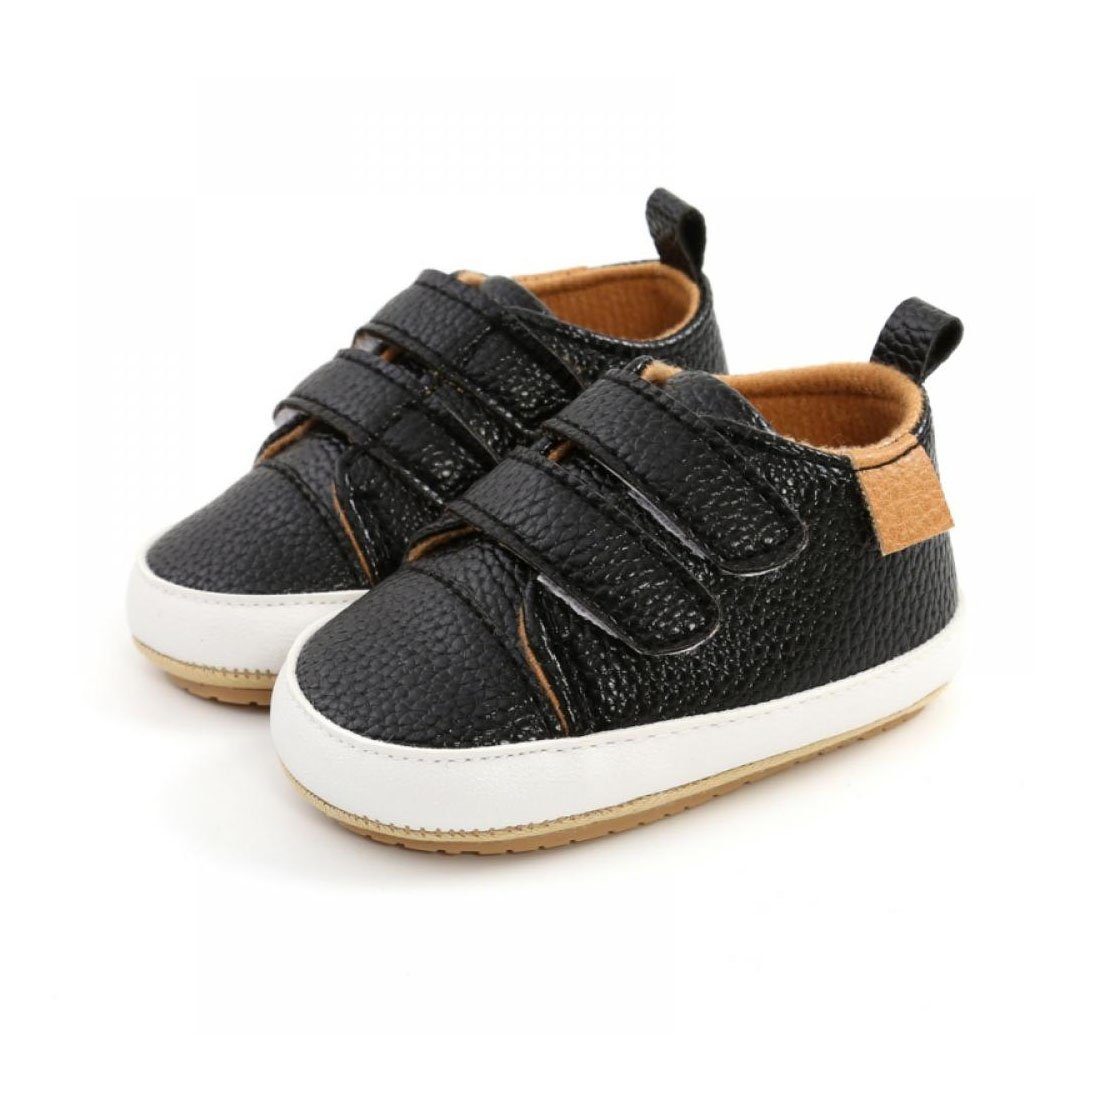 Unisex Baby Buckle Strap Solid Shoes – The Trendy Toddlers